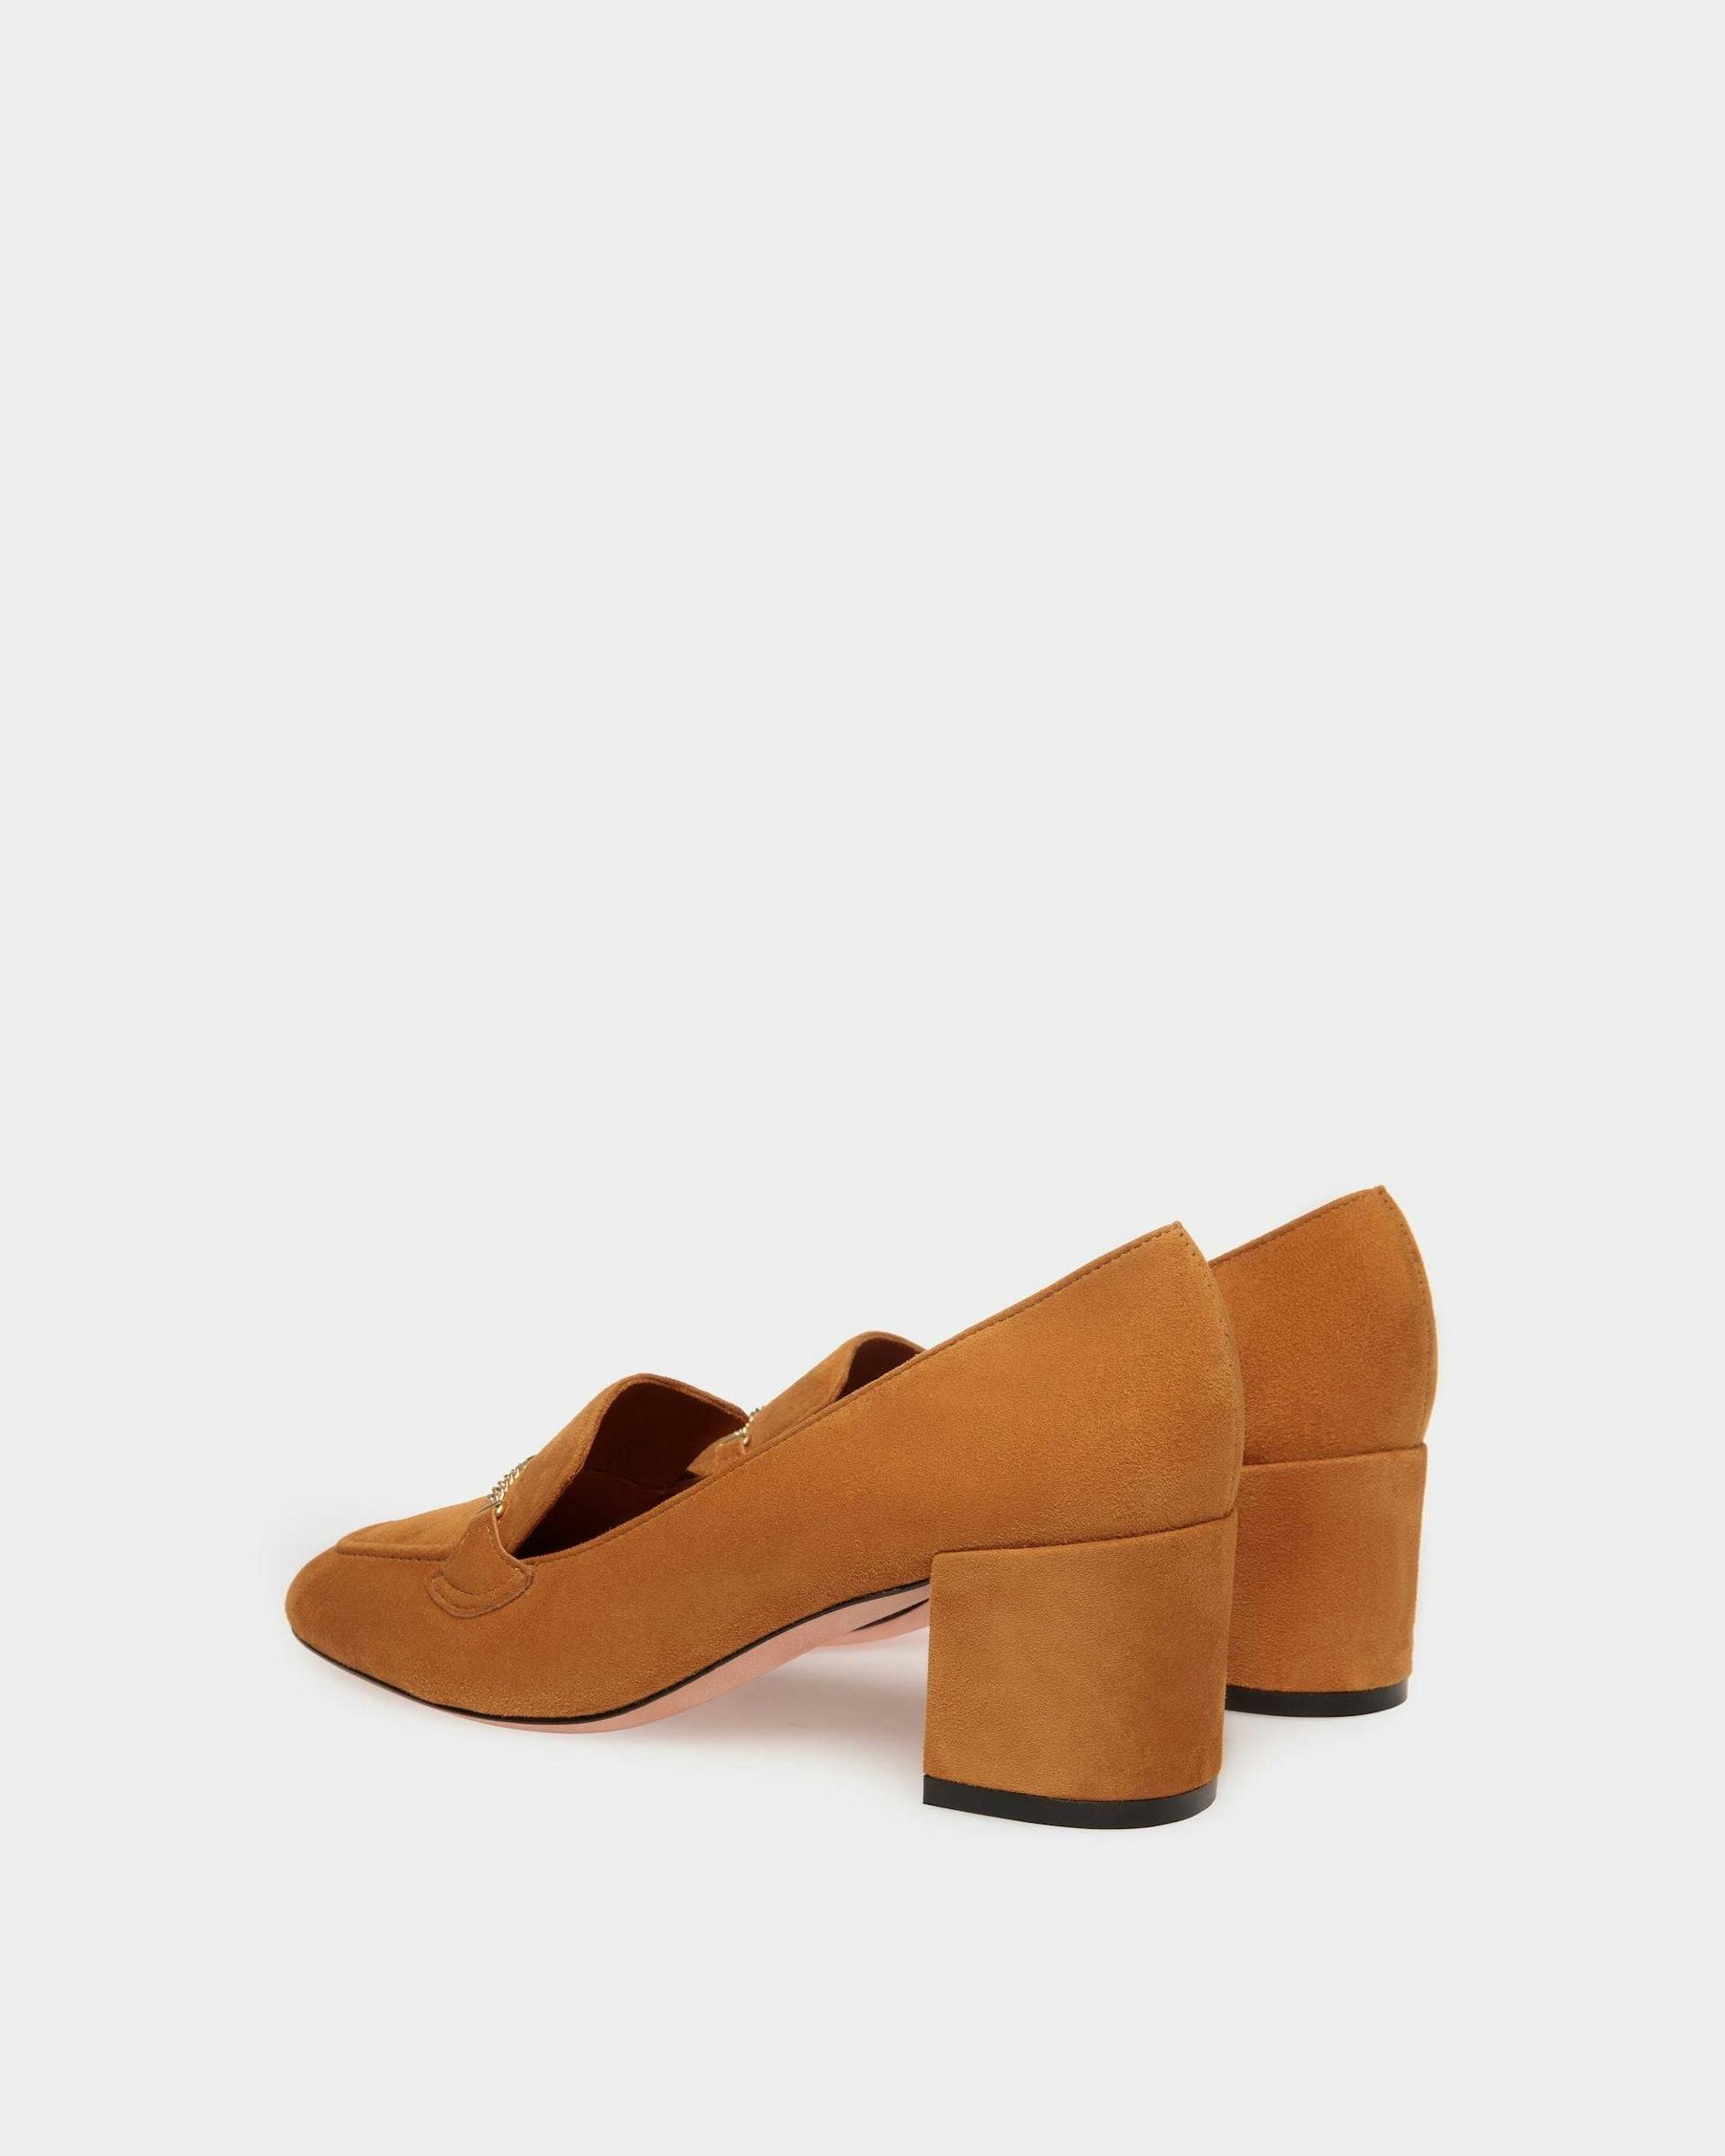 Women's Daily Emblem Pump in Brown Suede | Bally | Still Life 3/4 Back